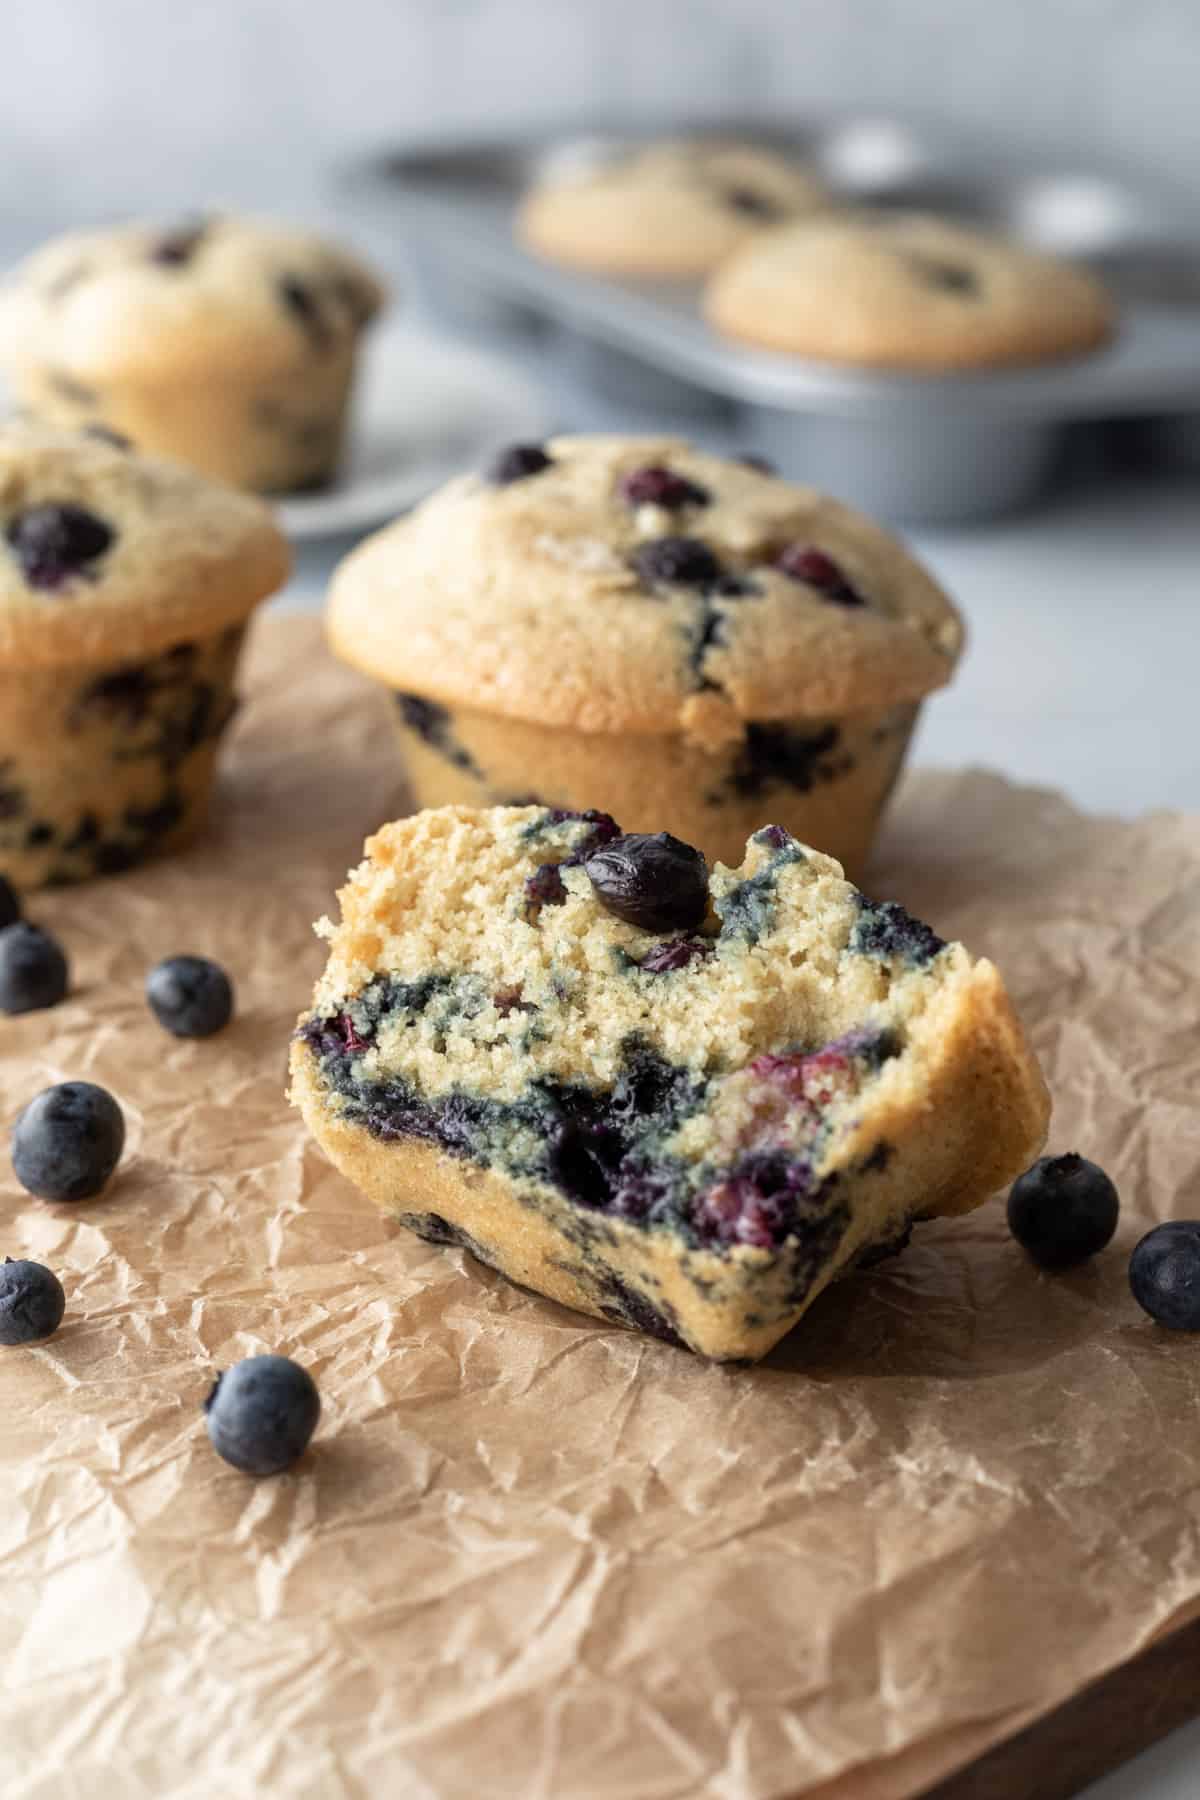 muffin cut in half showing moist, fluffy crumb and juicy blueberries inside.